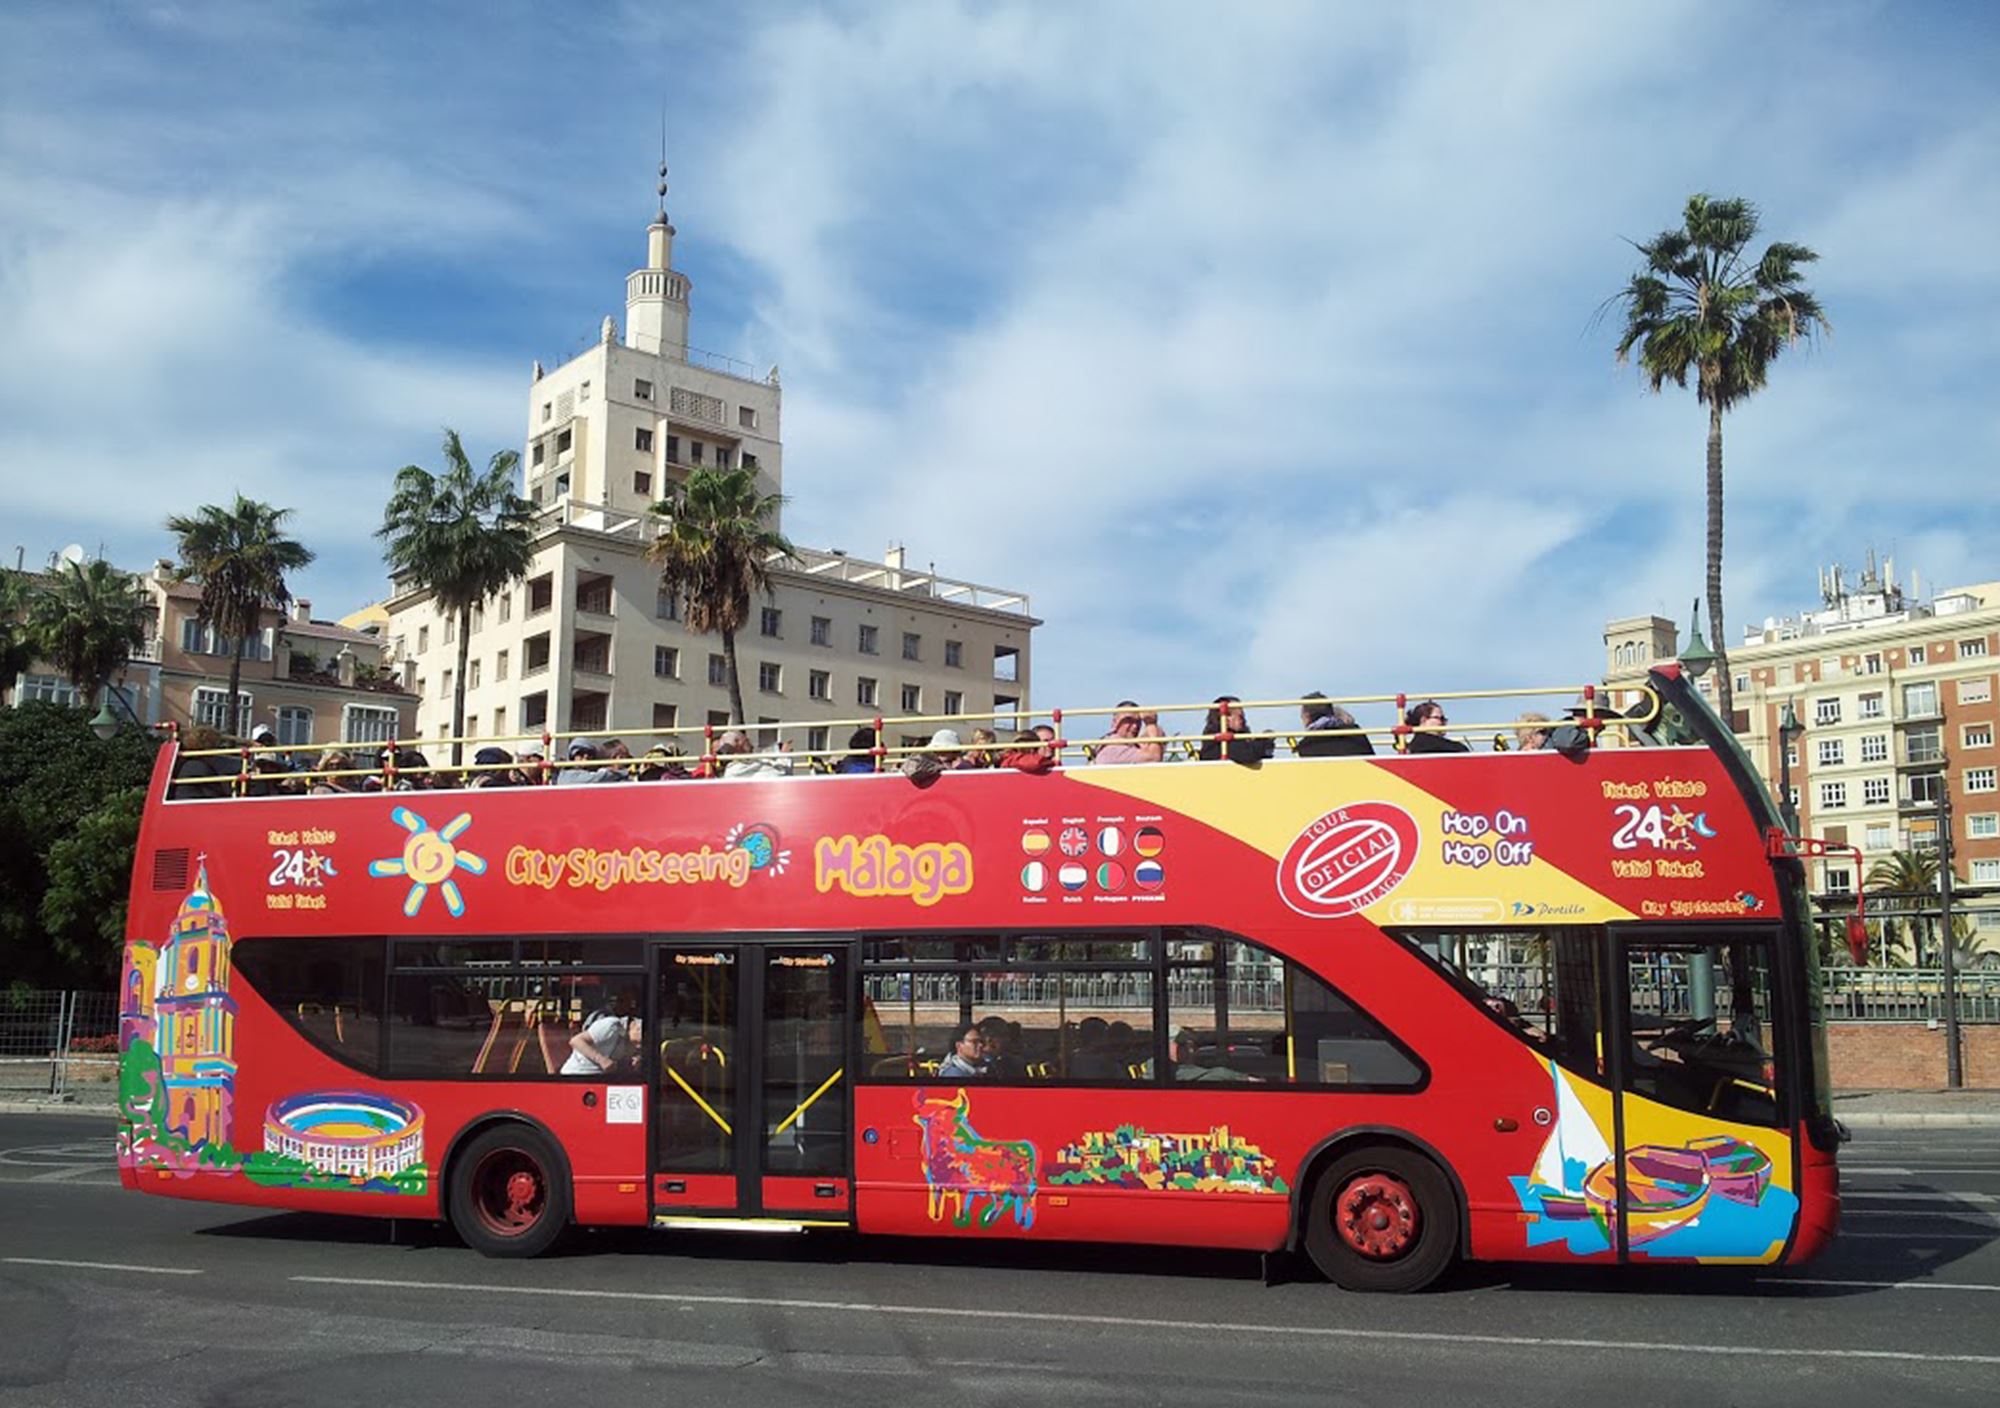 book booking get purchase buy tickets visit tours Tourist Bus City Sightseeing Malaga spain